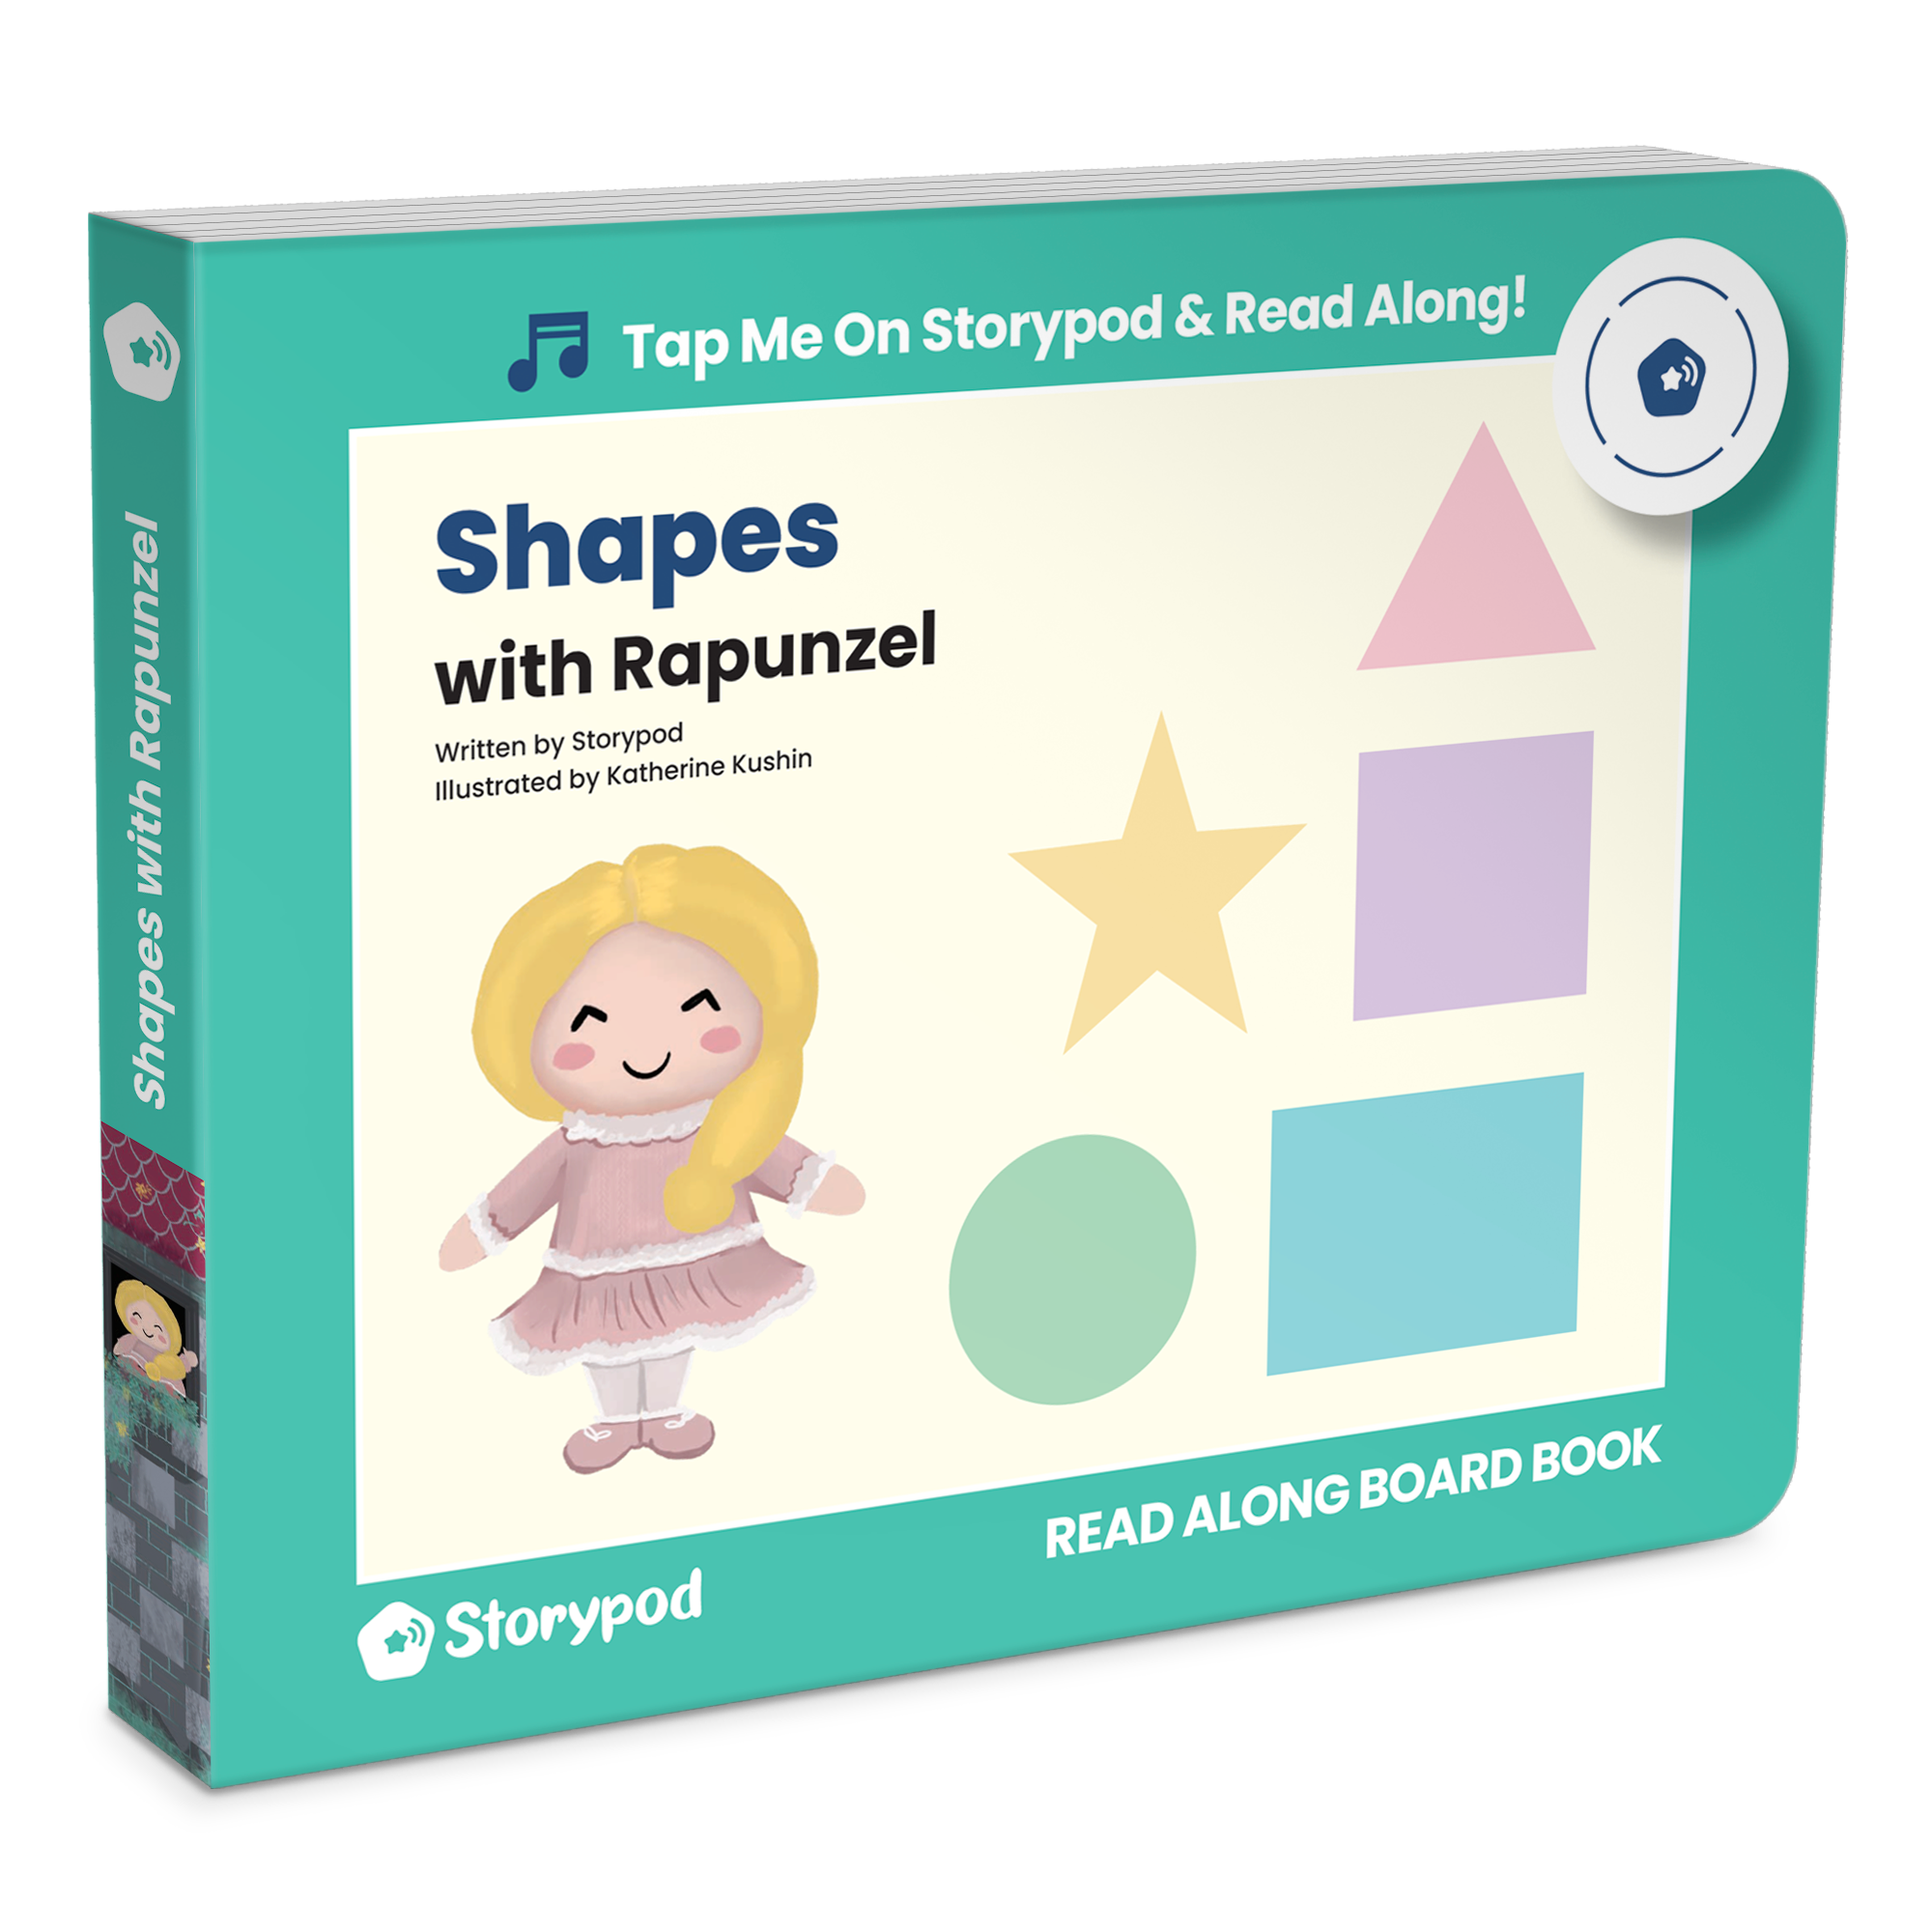 Shapes with Rapunzel